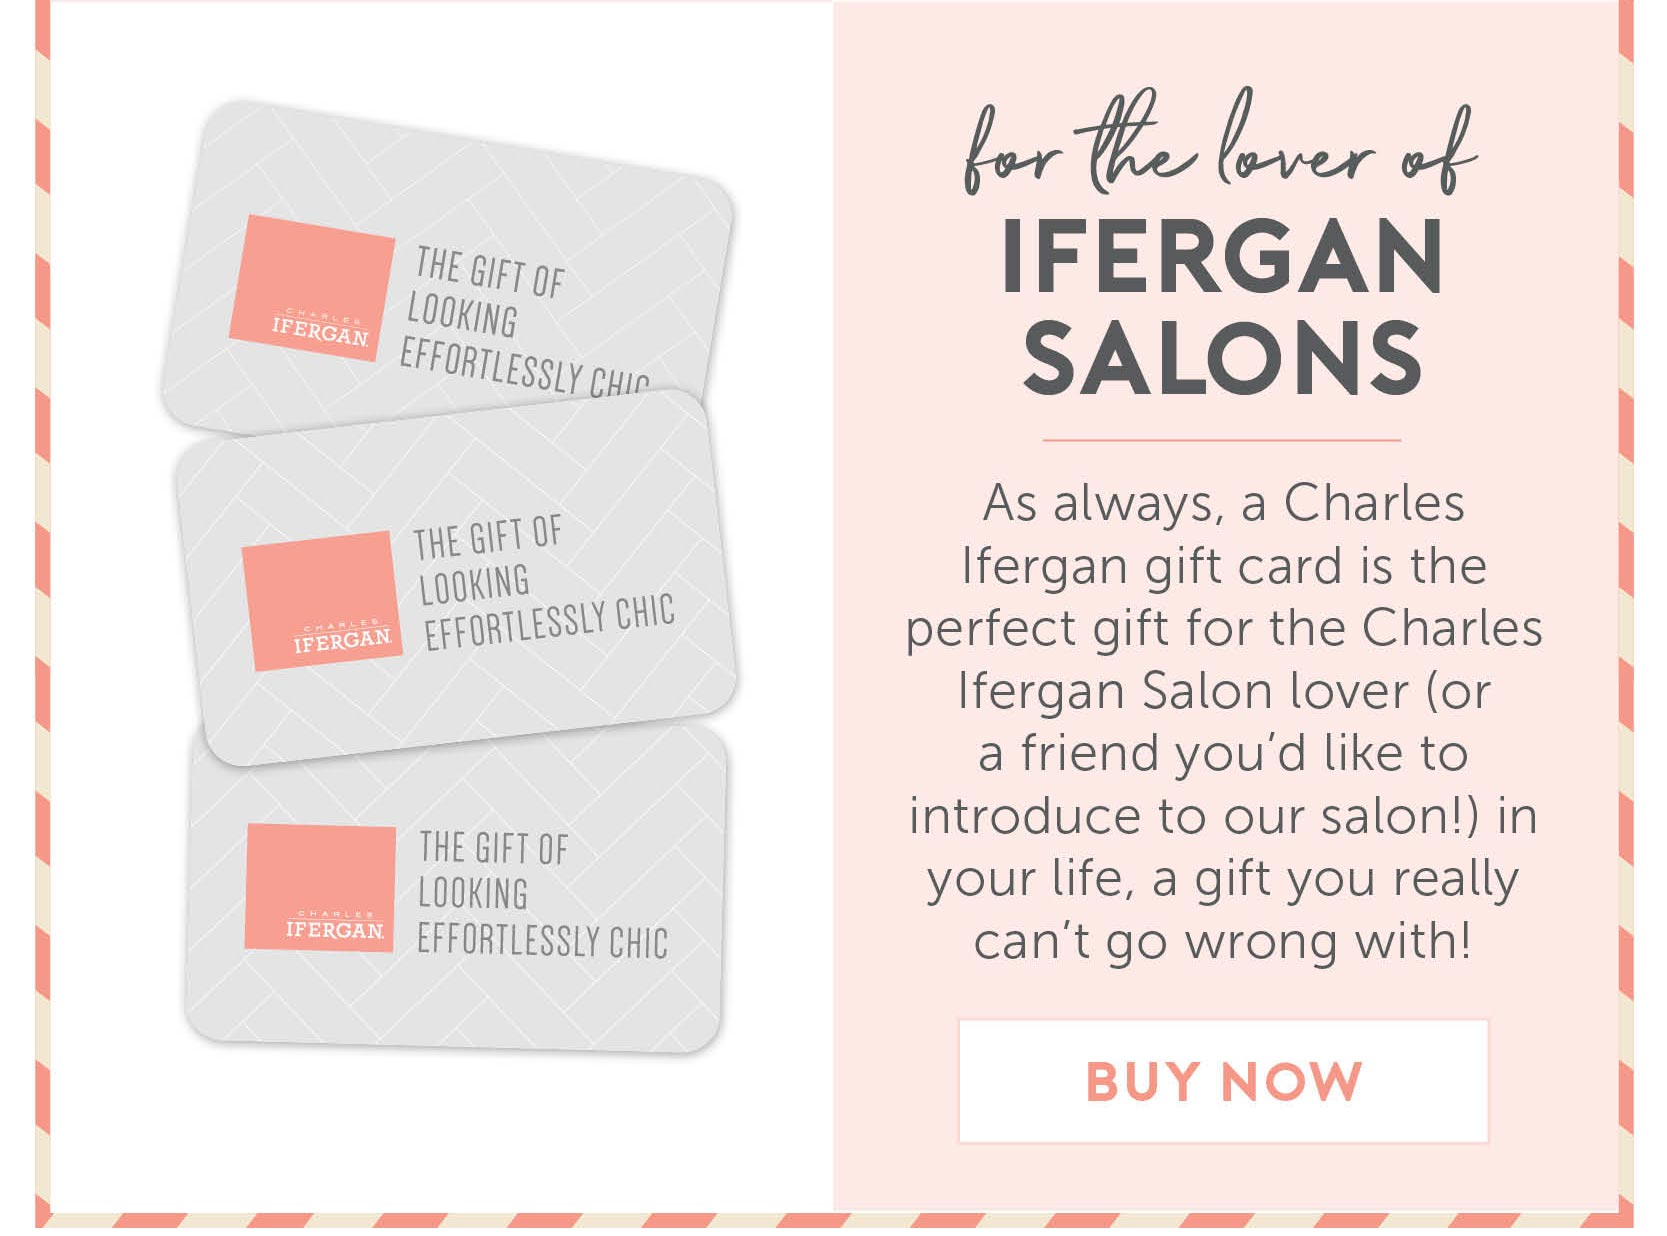 For the lover of Ifergan Salons - As always, a Charles Ifergan gift card is the perfect gift for the Charles Ifergan Salon lover (or a friend you’d like to introduce to our salon!) in your life- a gift you really can’t go wrong with!